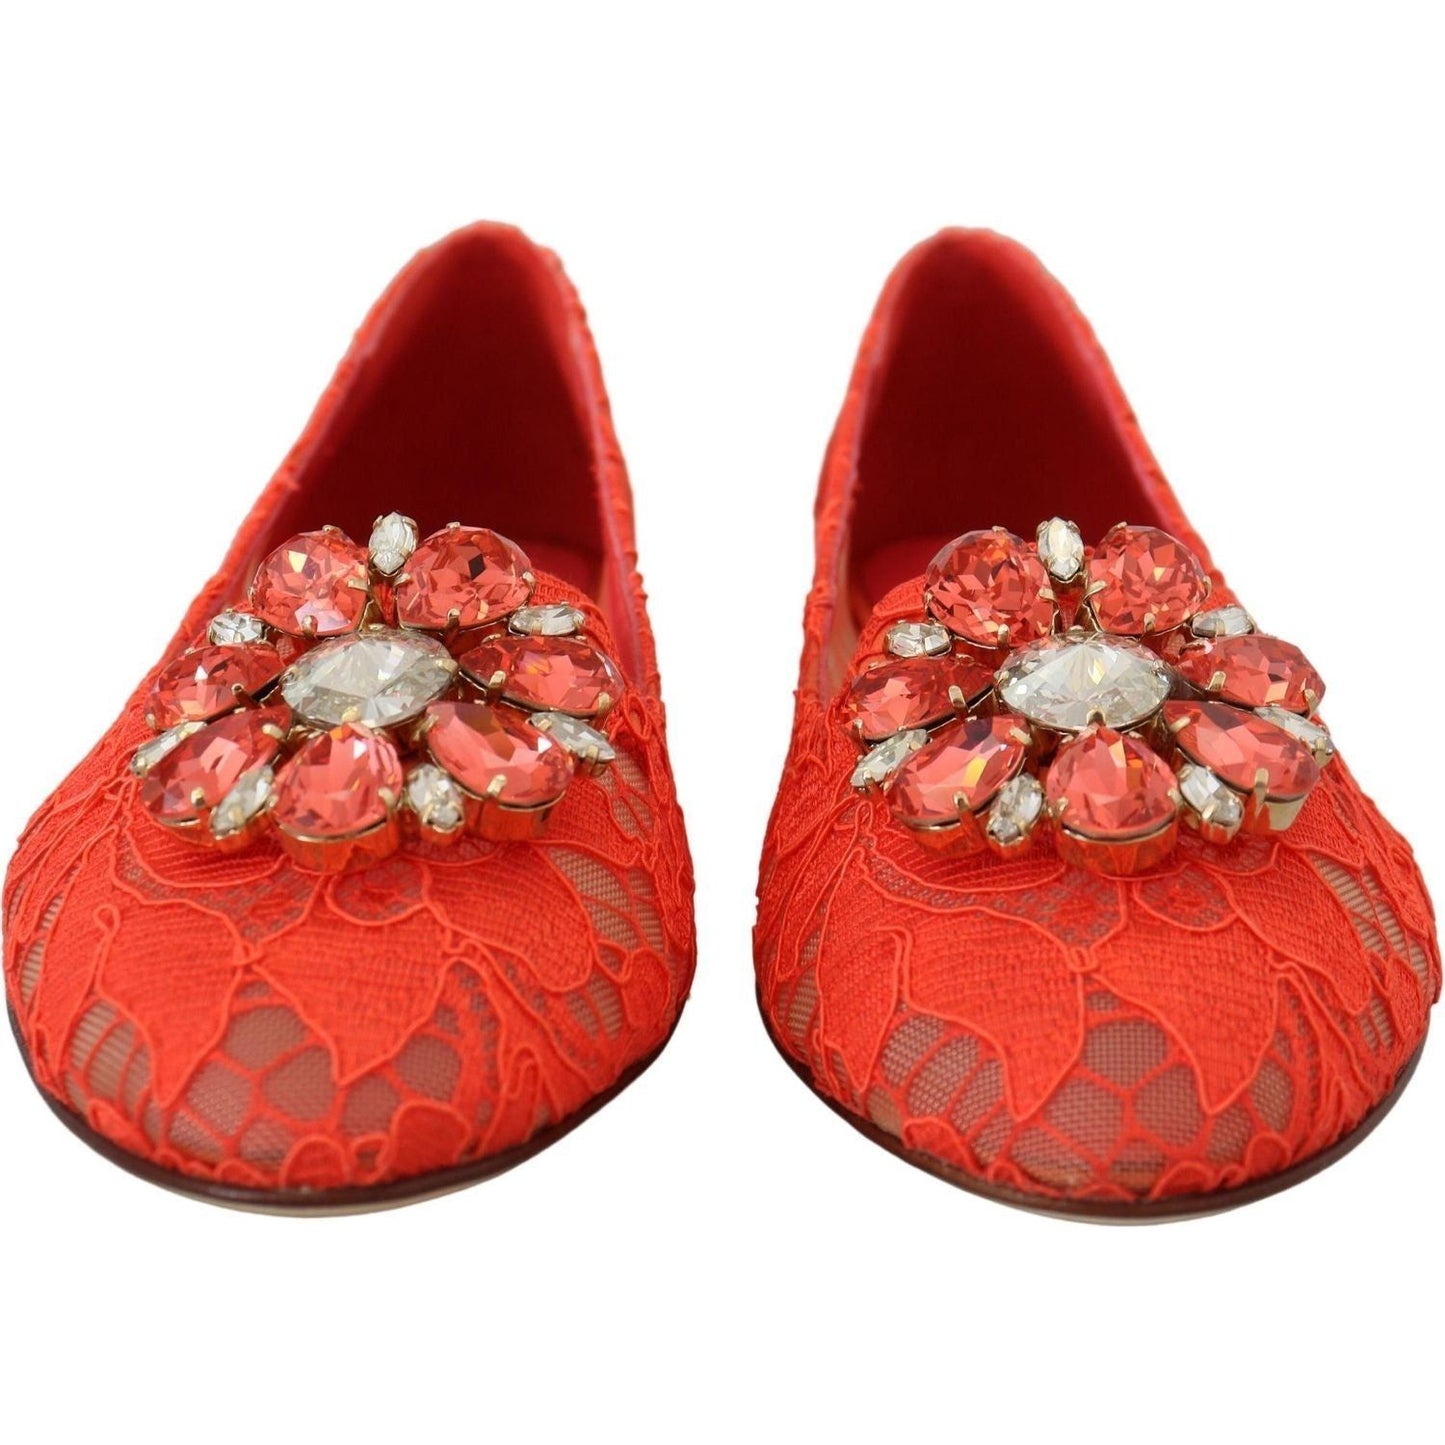 Dolce & Gabbana Elegant Lace Vally Flats in Coral Red red-taormina-lace-crystals-ballet-flats-shoes IMG_4965-4f32b91a-ccf.jpg